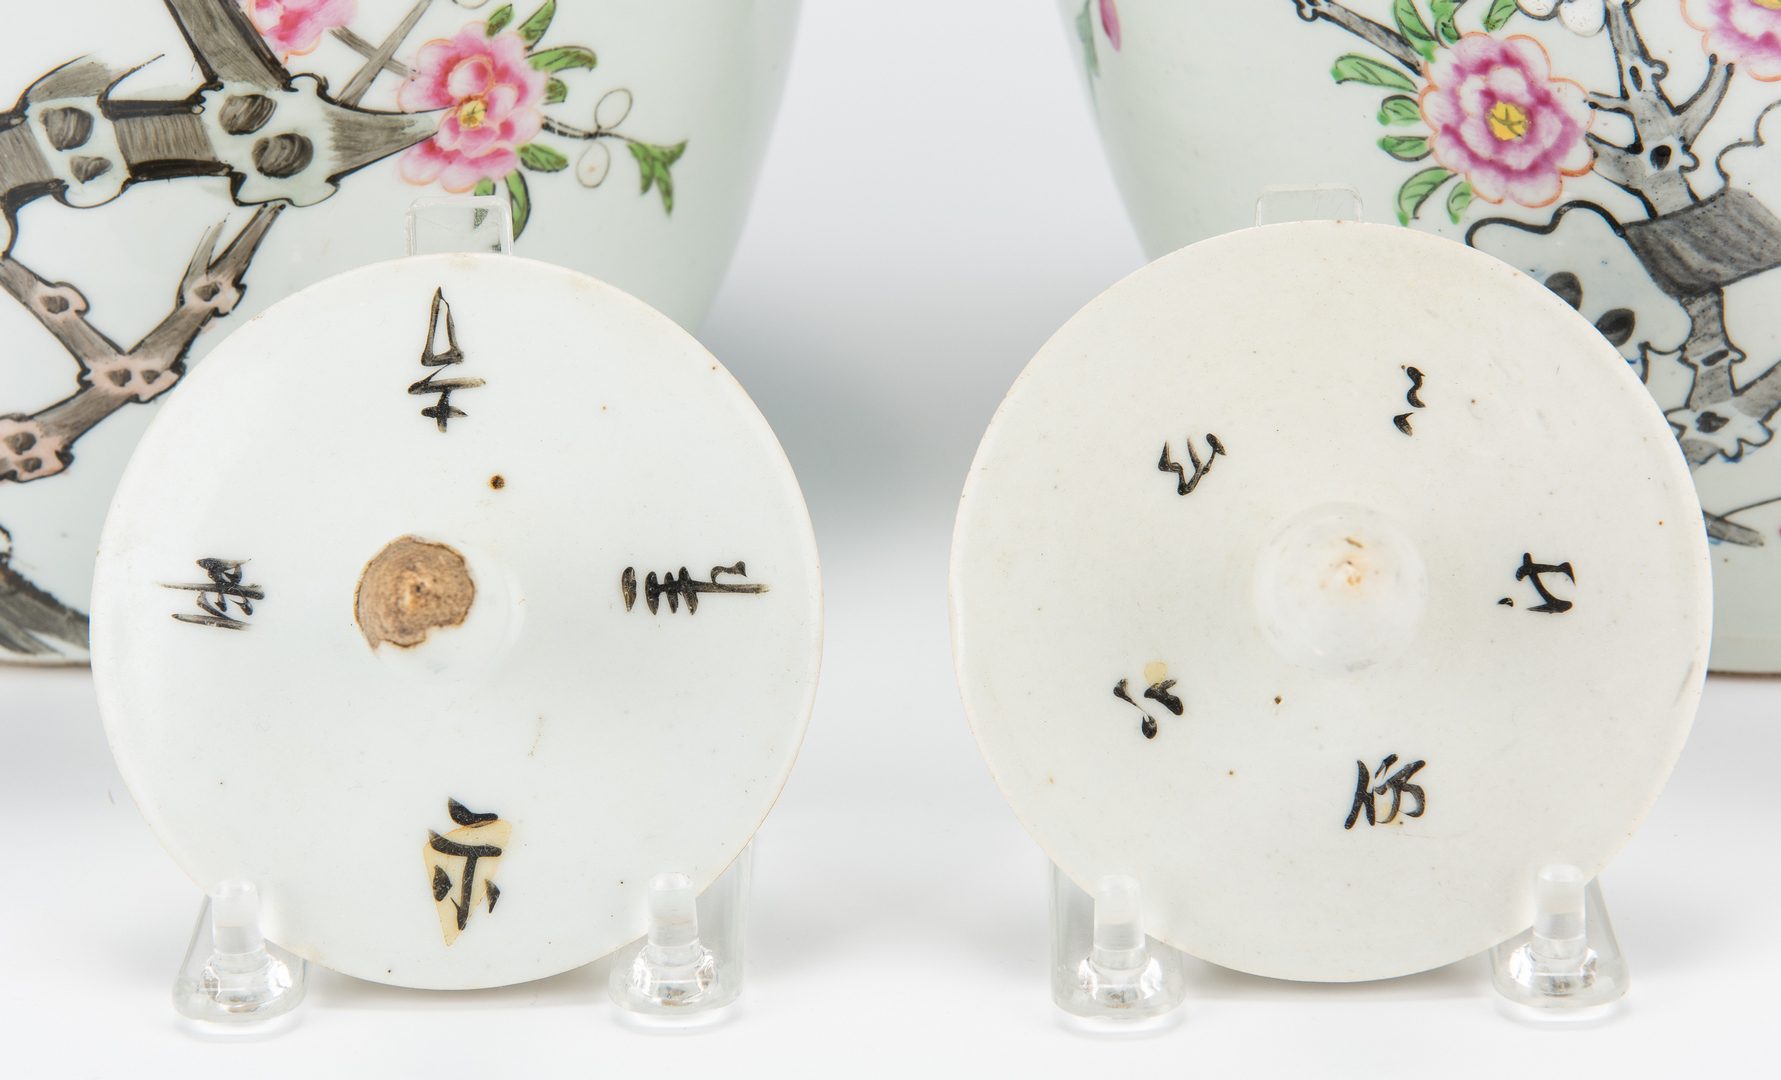 Lot 313: Pair of Chinese Porcelain Ginger Jars